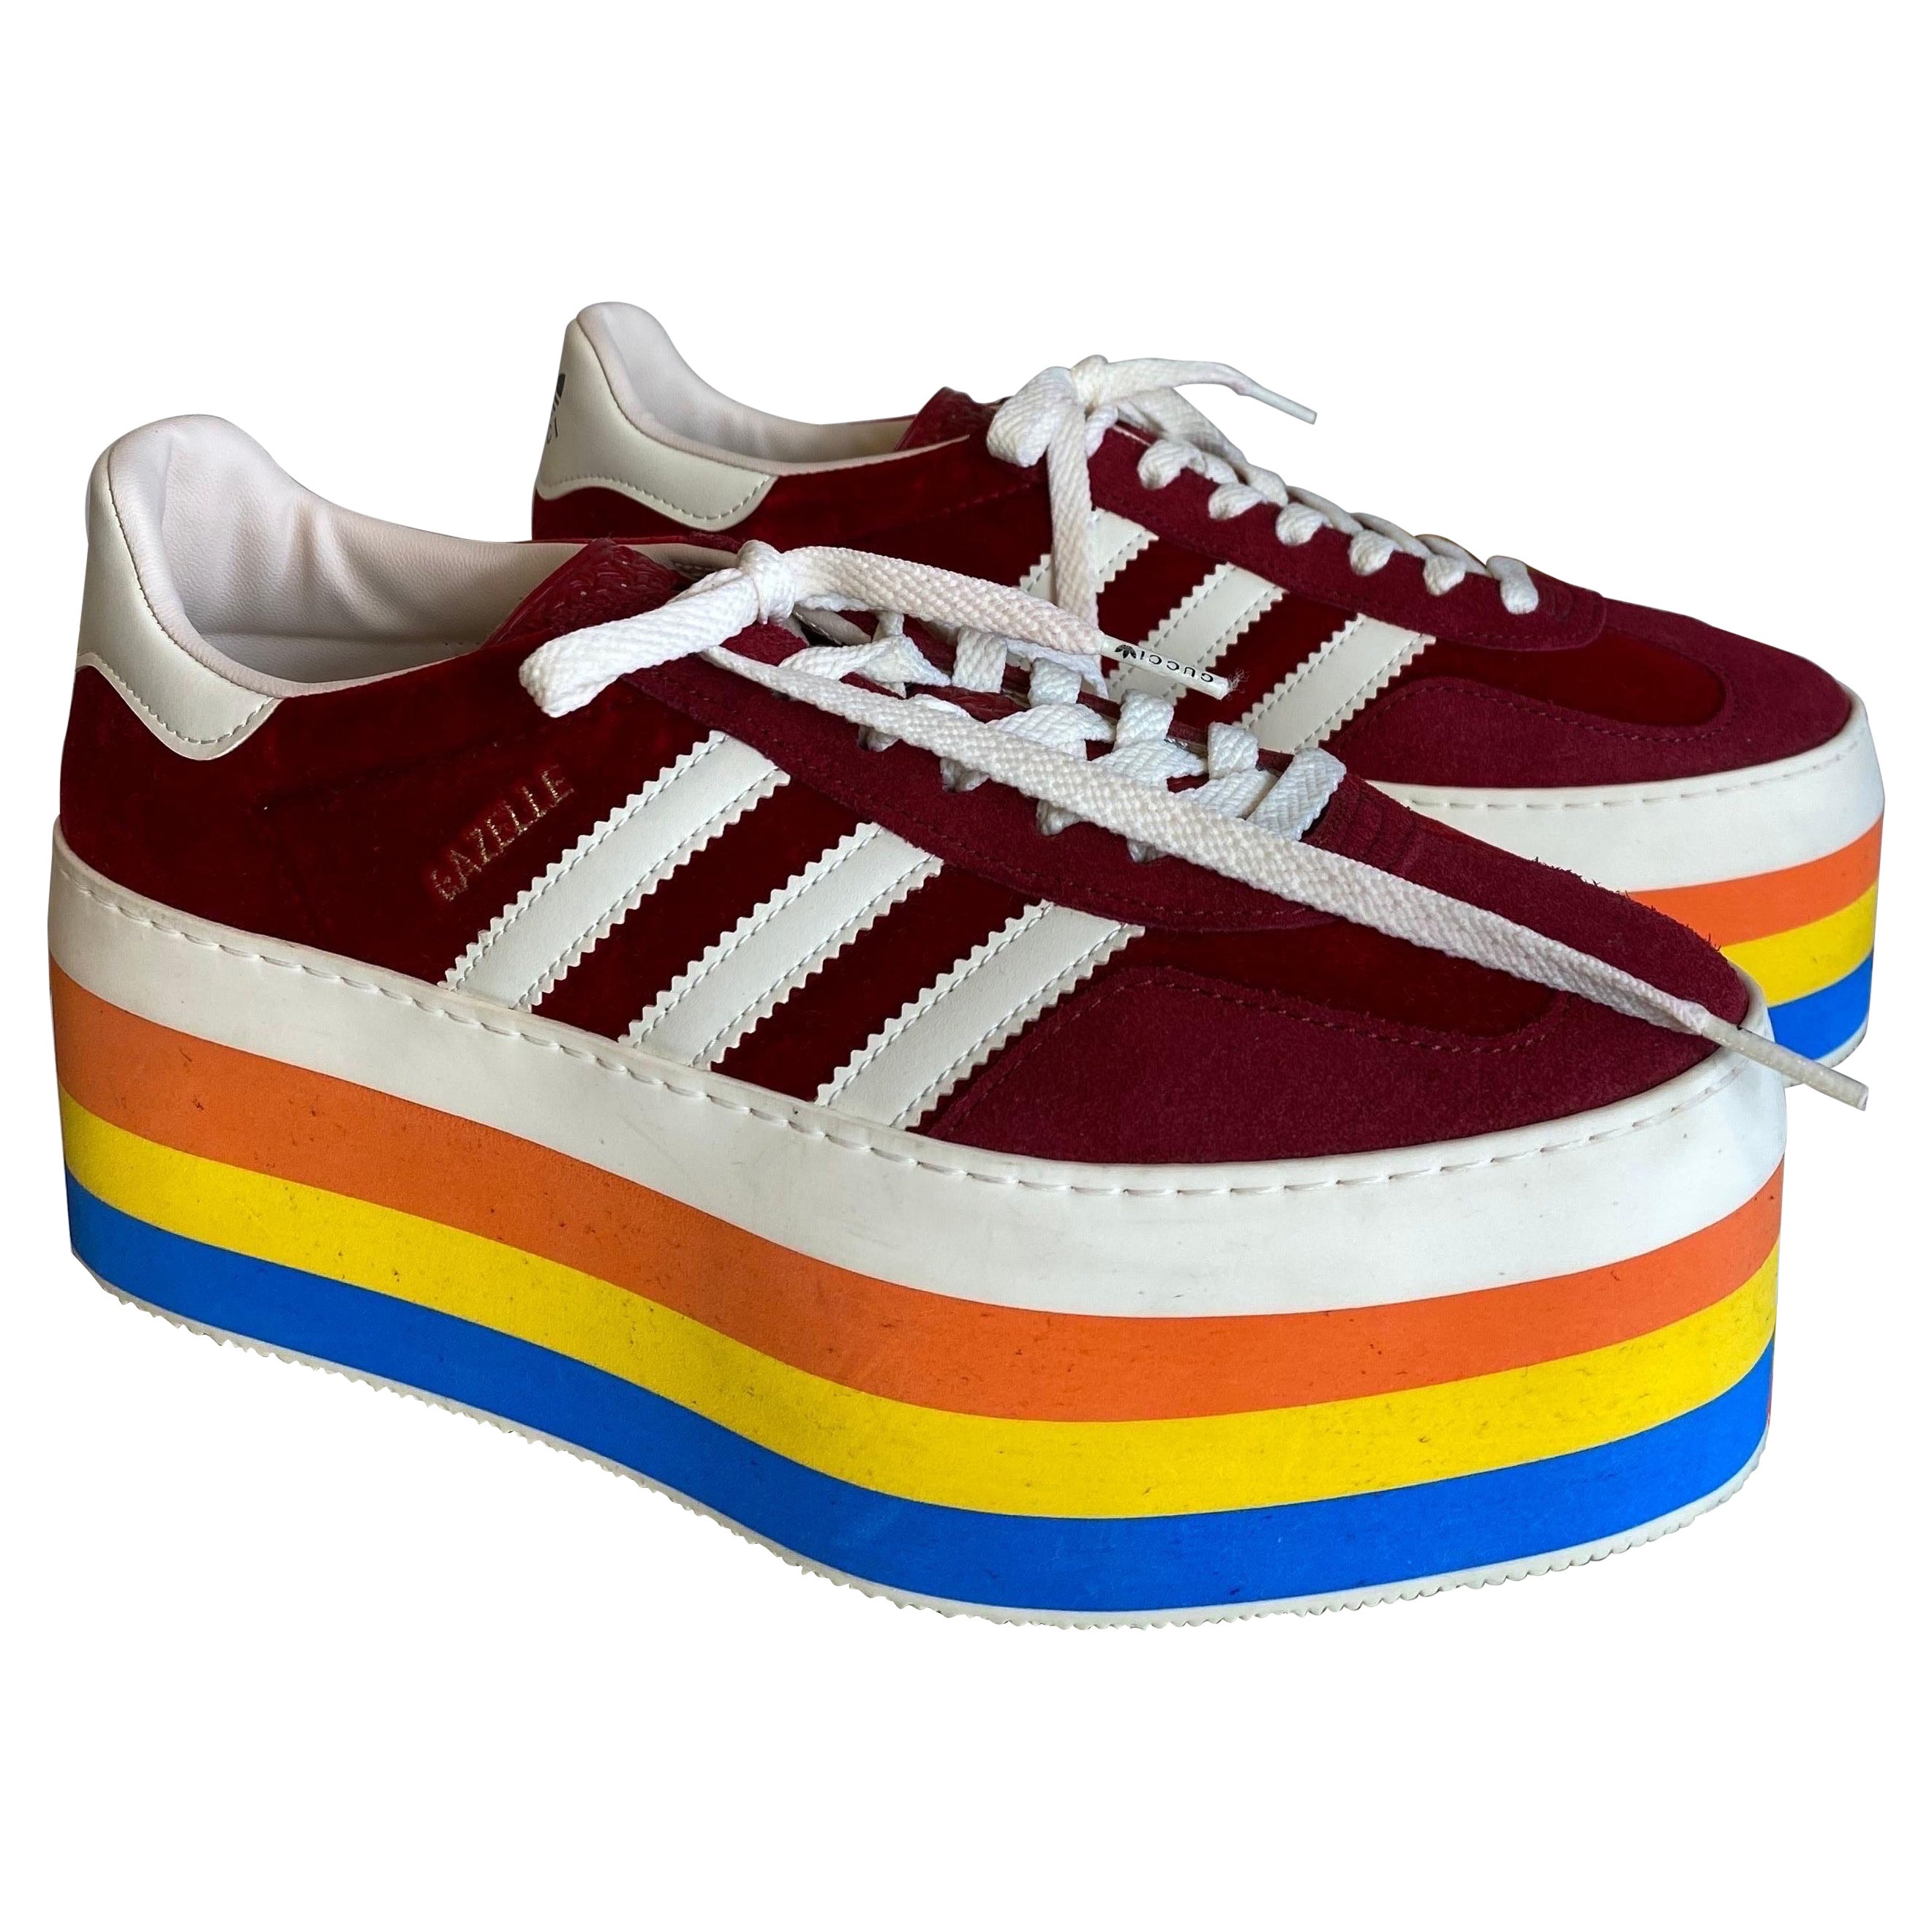 Adidas X Gucci Gazelle bordeaux and Rainbow sneakers For Sale